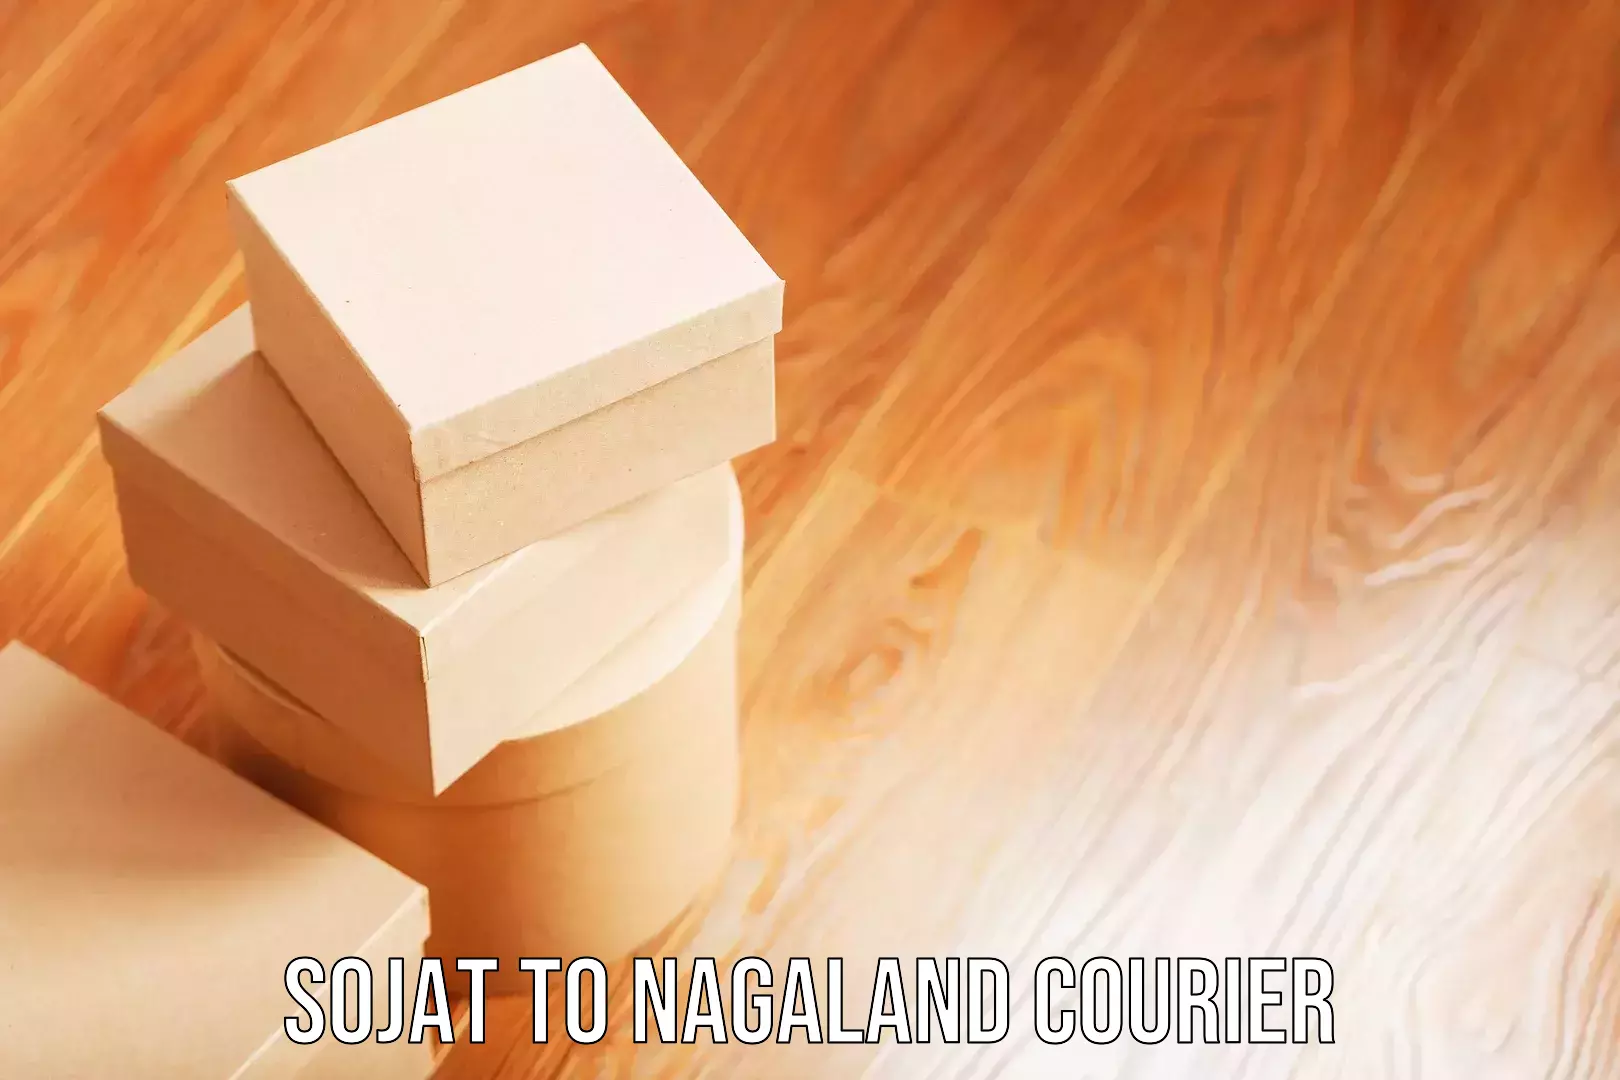 Luggage delivery estimate in Sojat to Nagaland